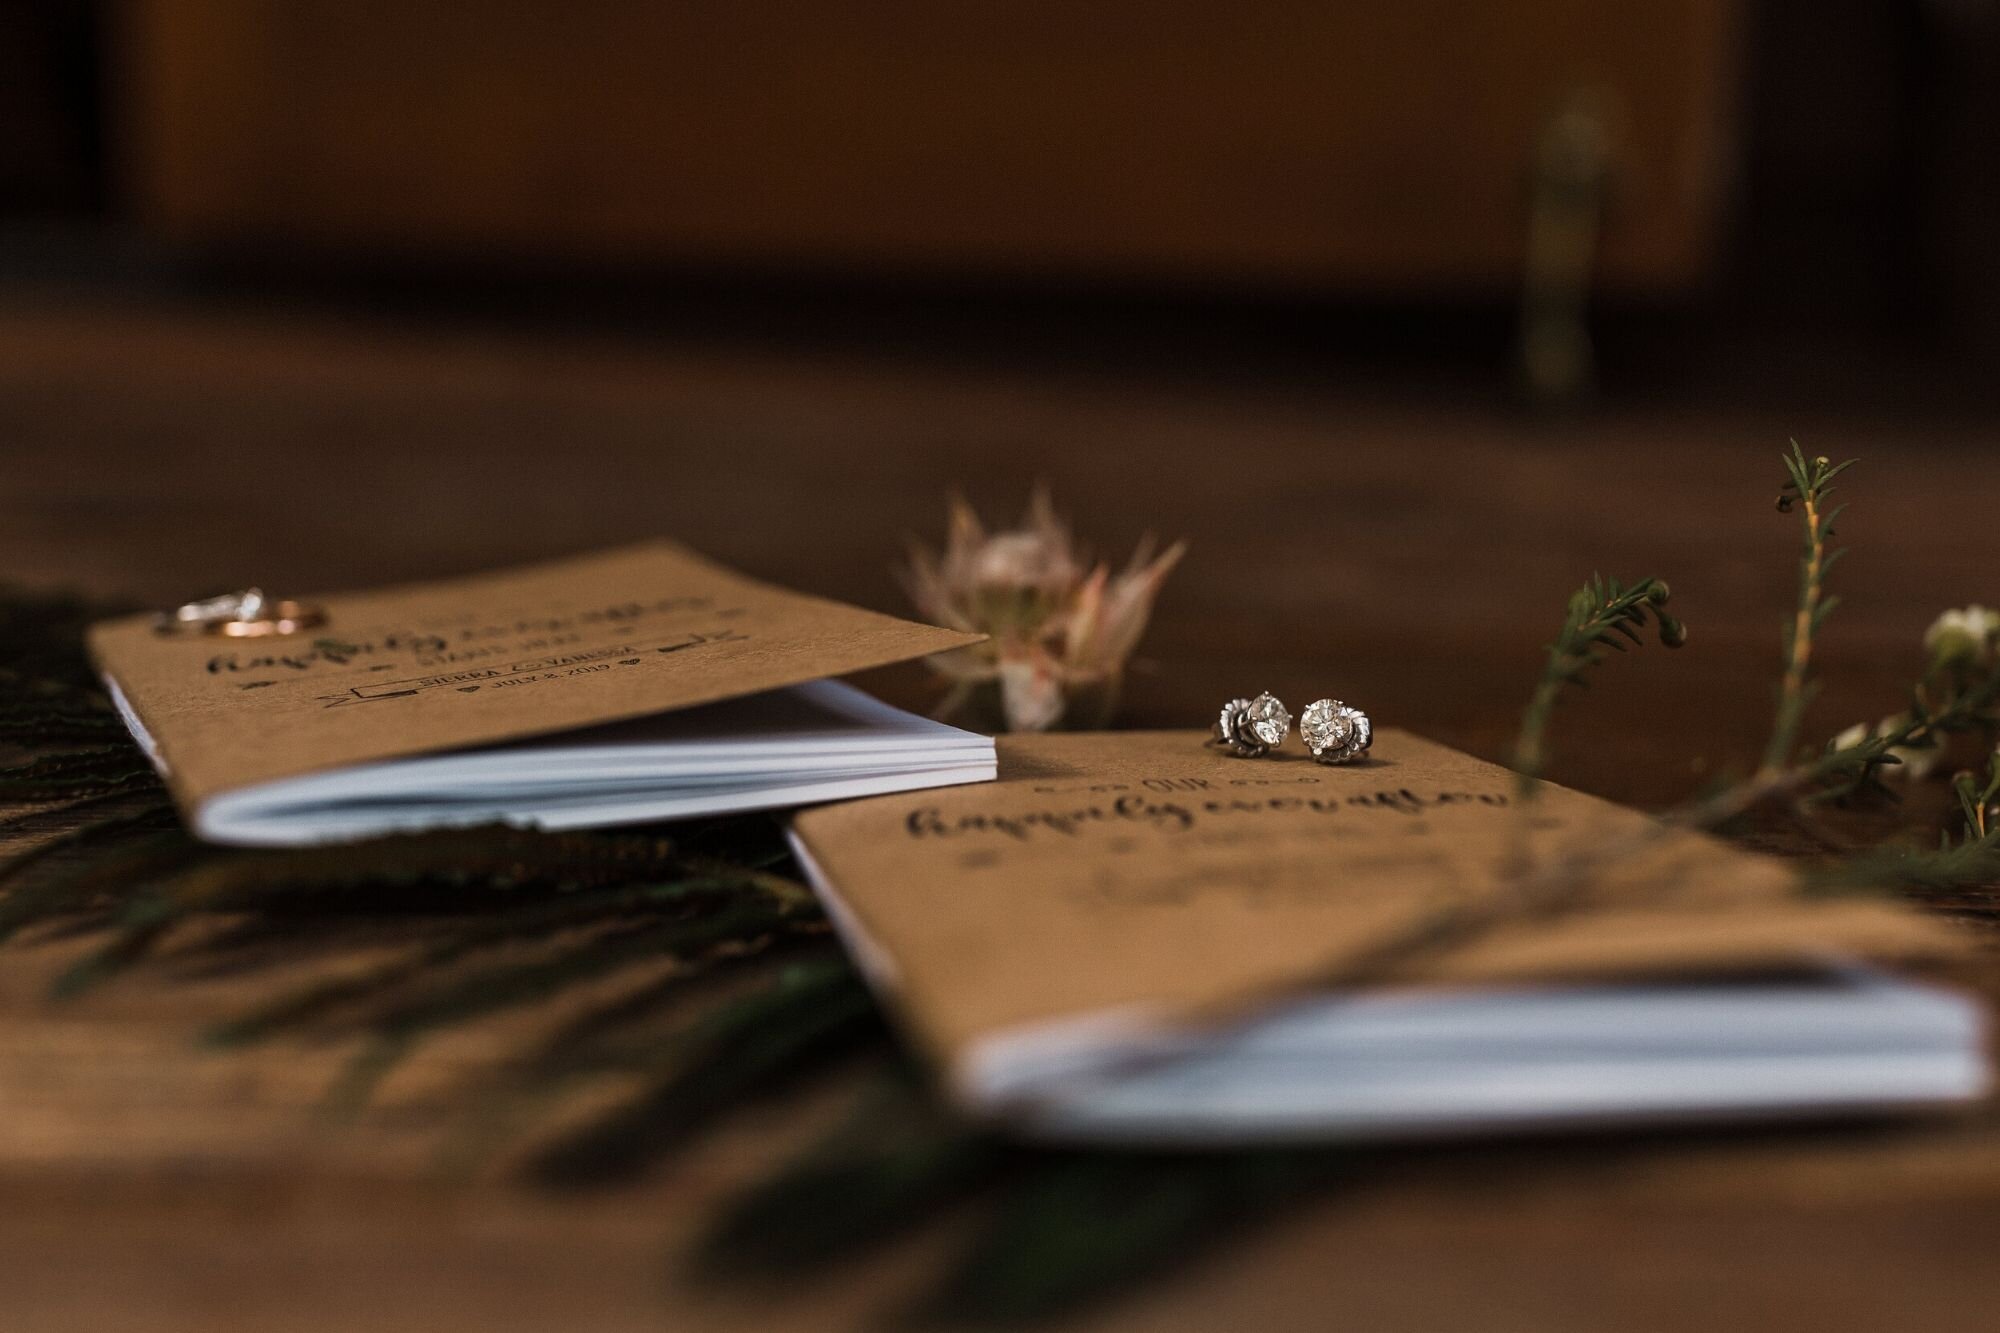 elopement with family | Between the Pine